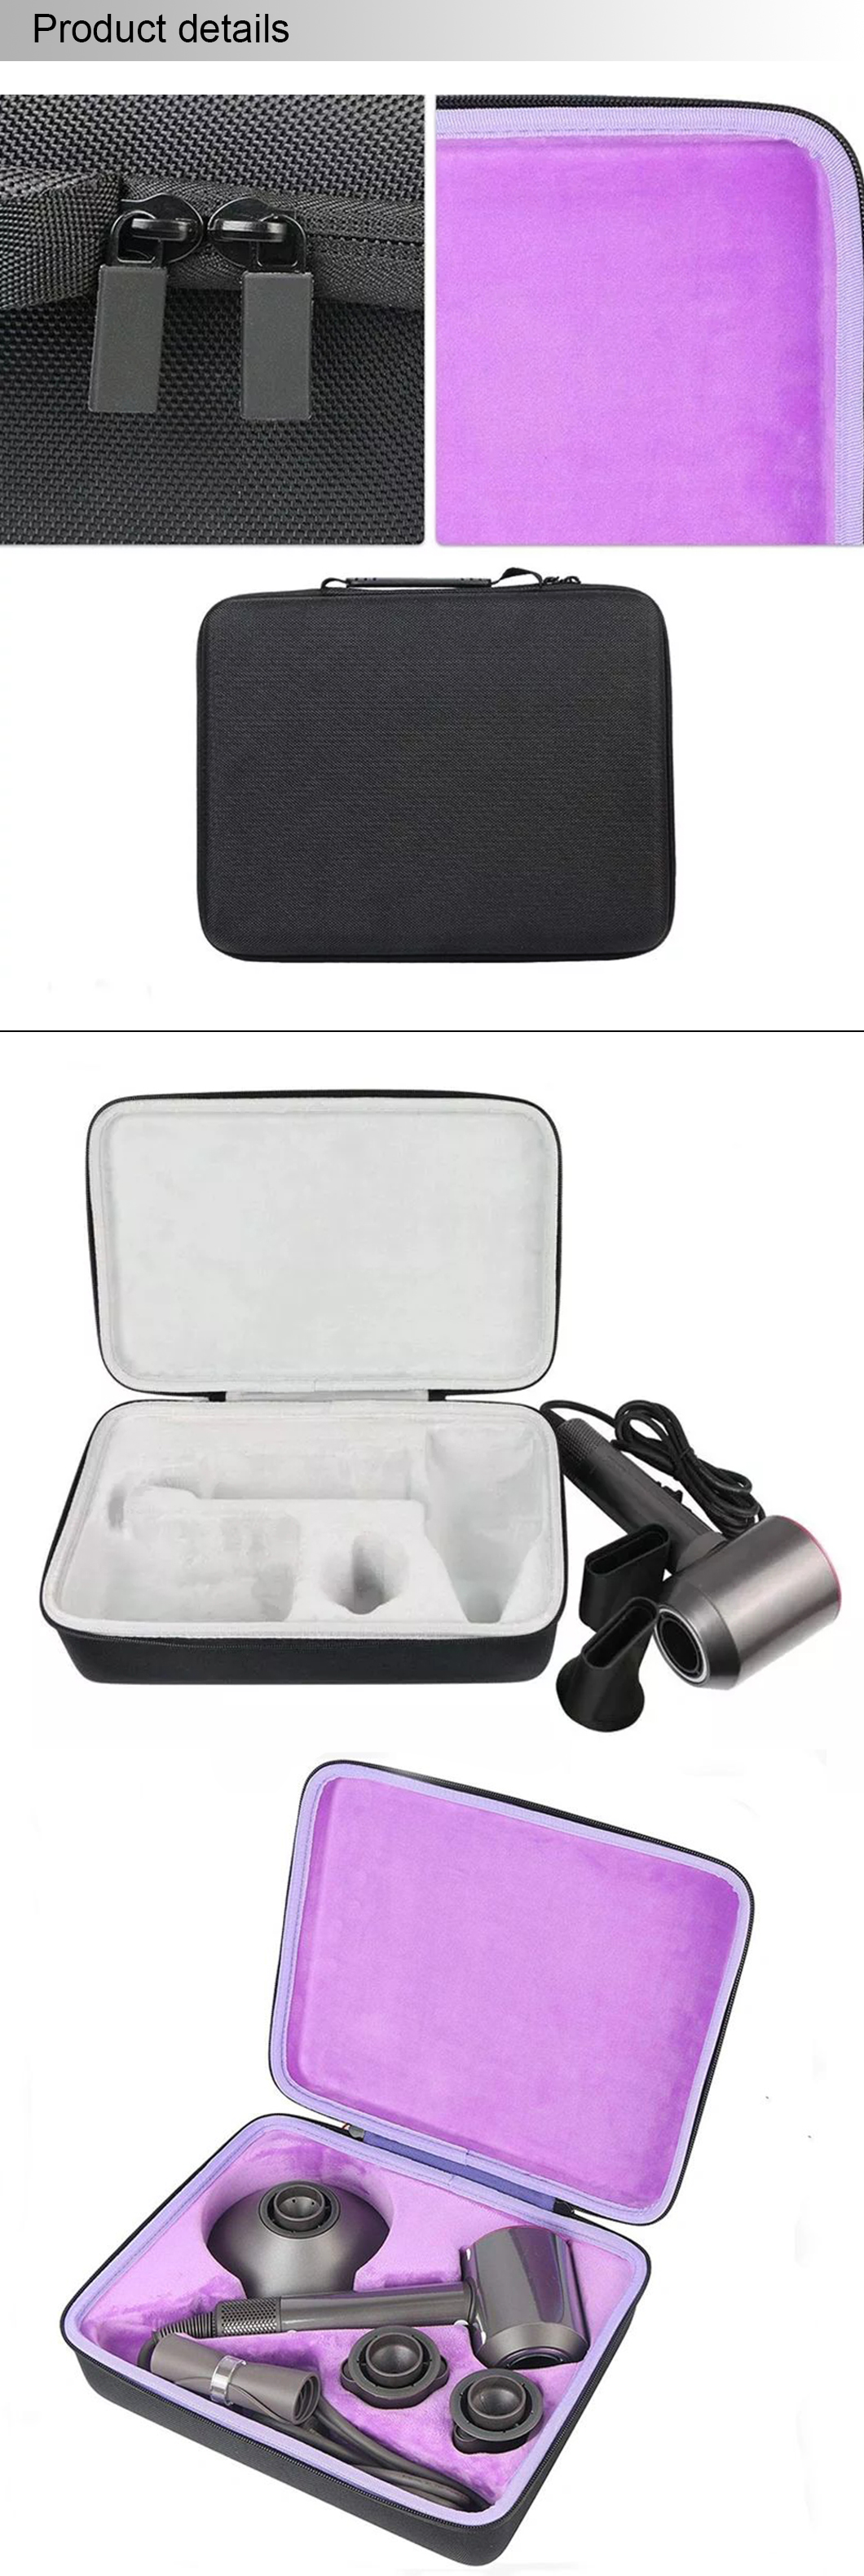 Hard Travel Case Protective EVA Storage Box for Dyson Supersonic Hair Dryer & Accessories(图1)